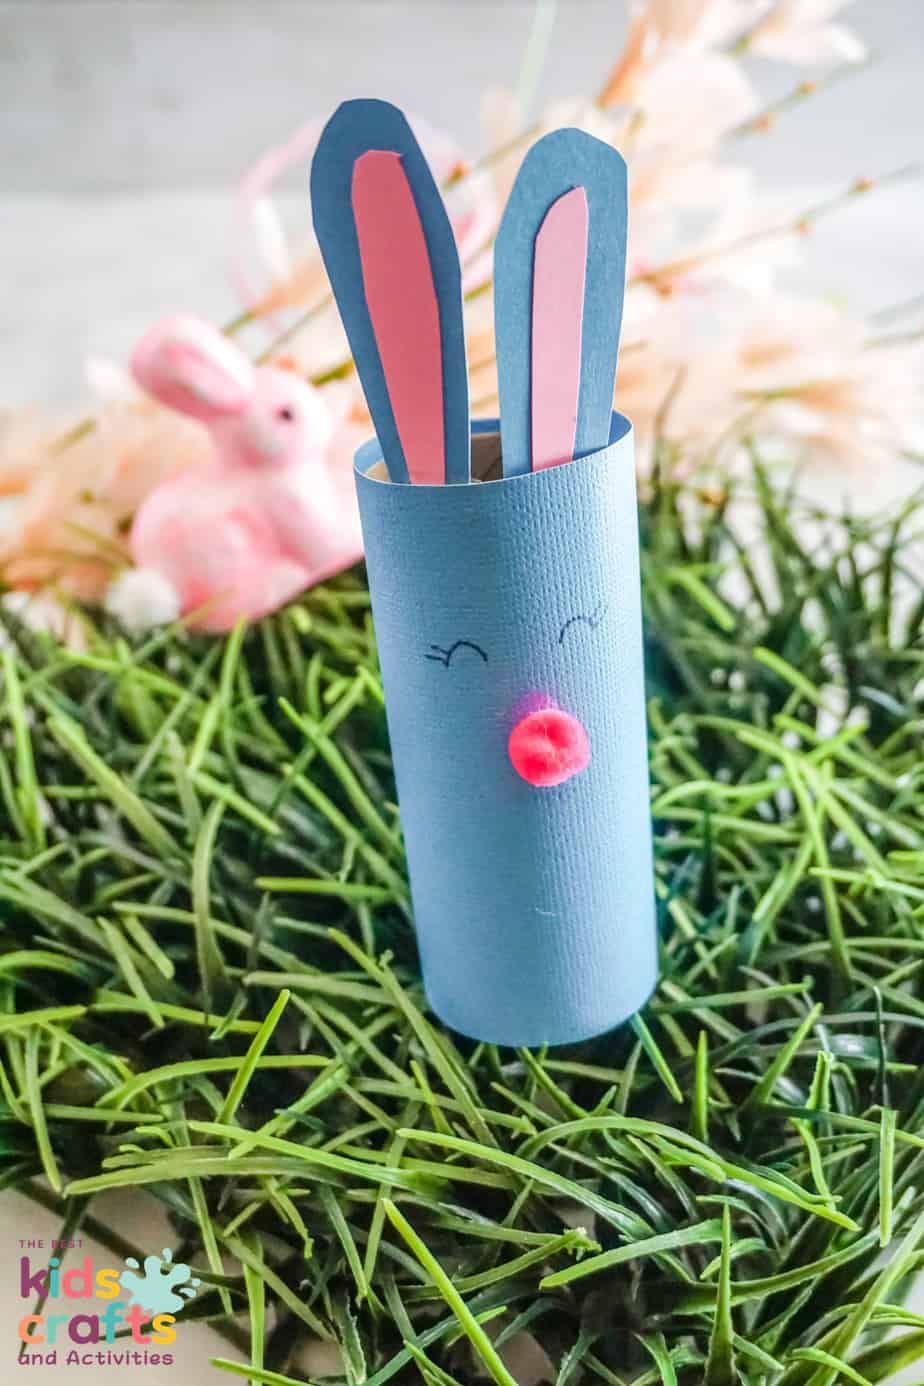 Toilet Paper Roll Bunny Craft